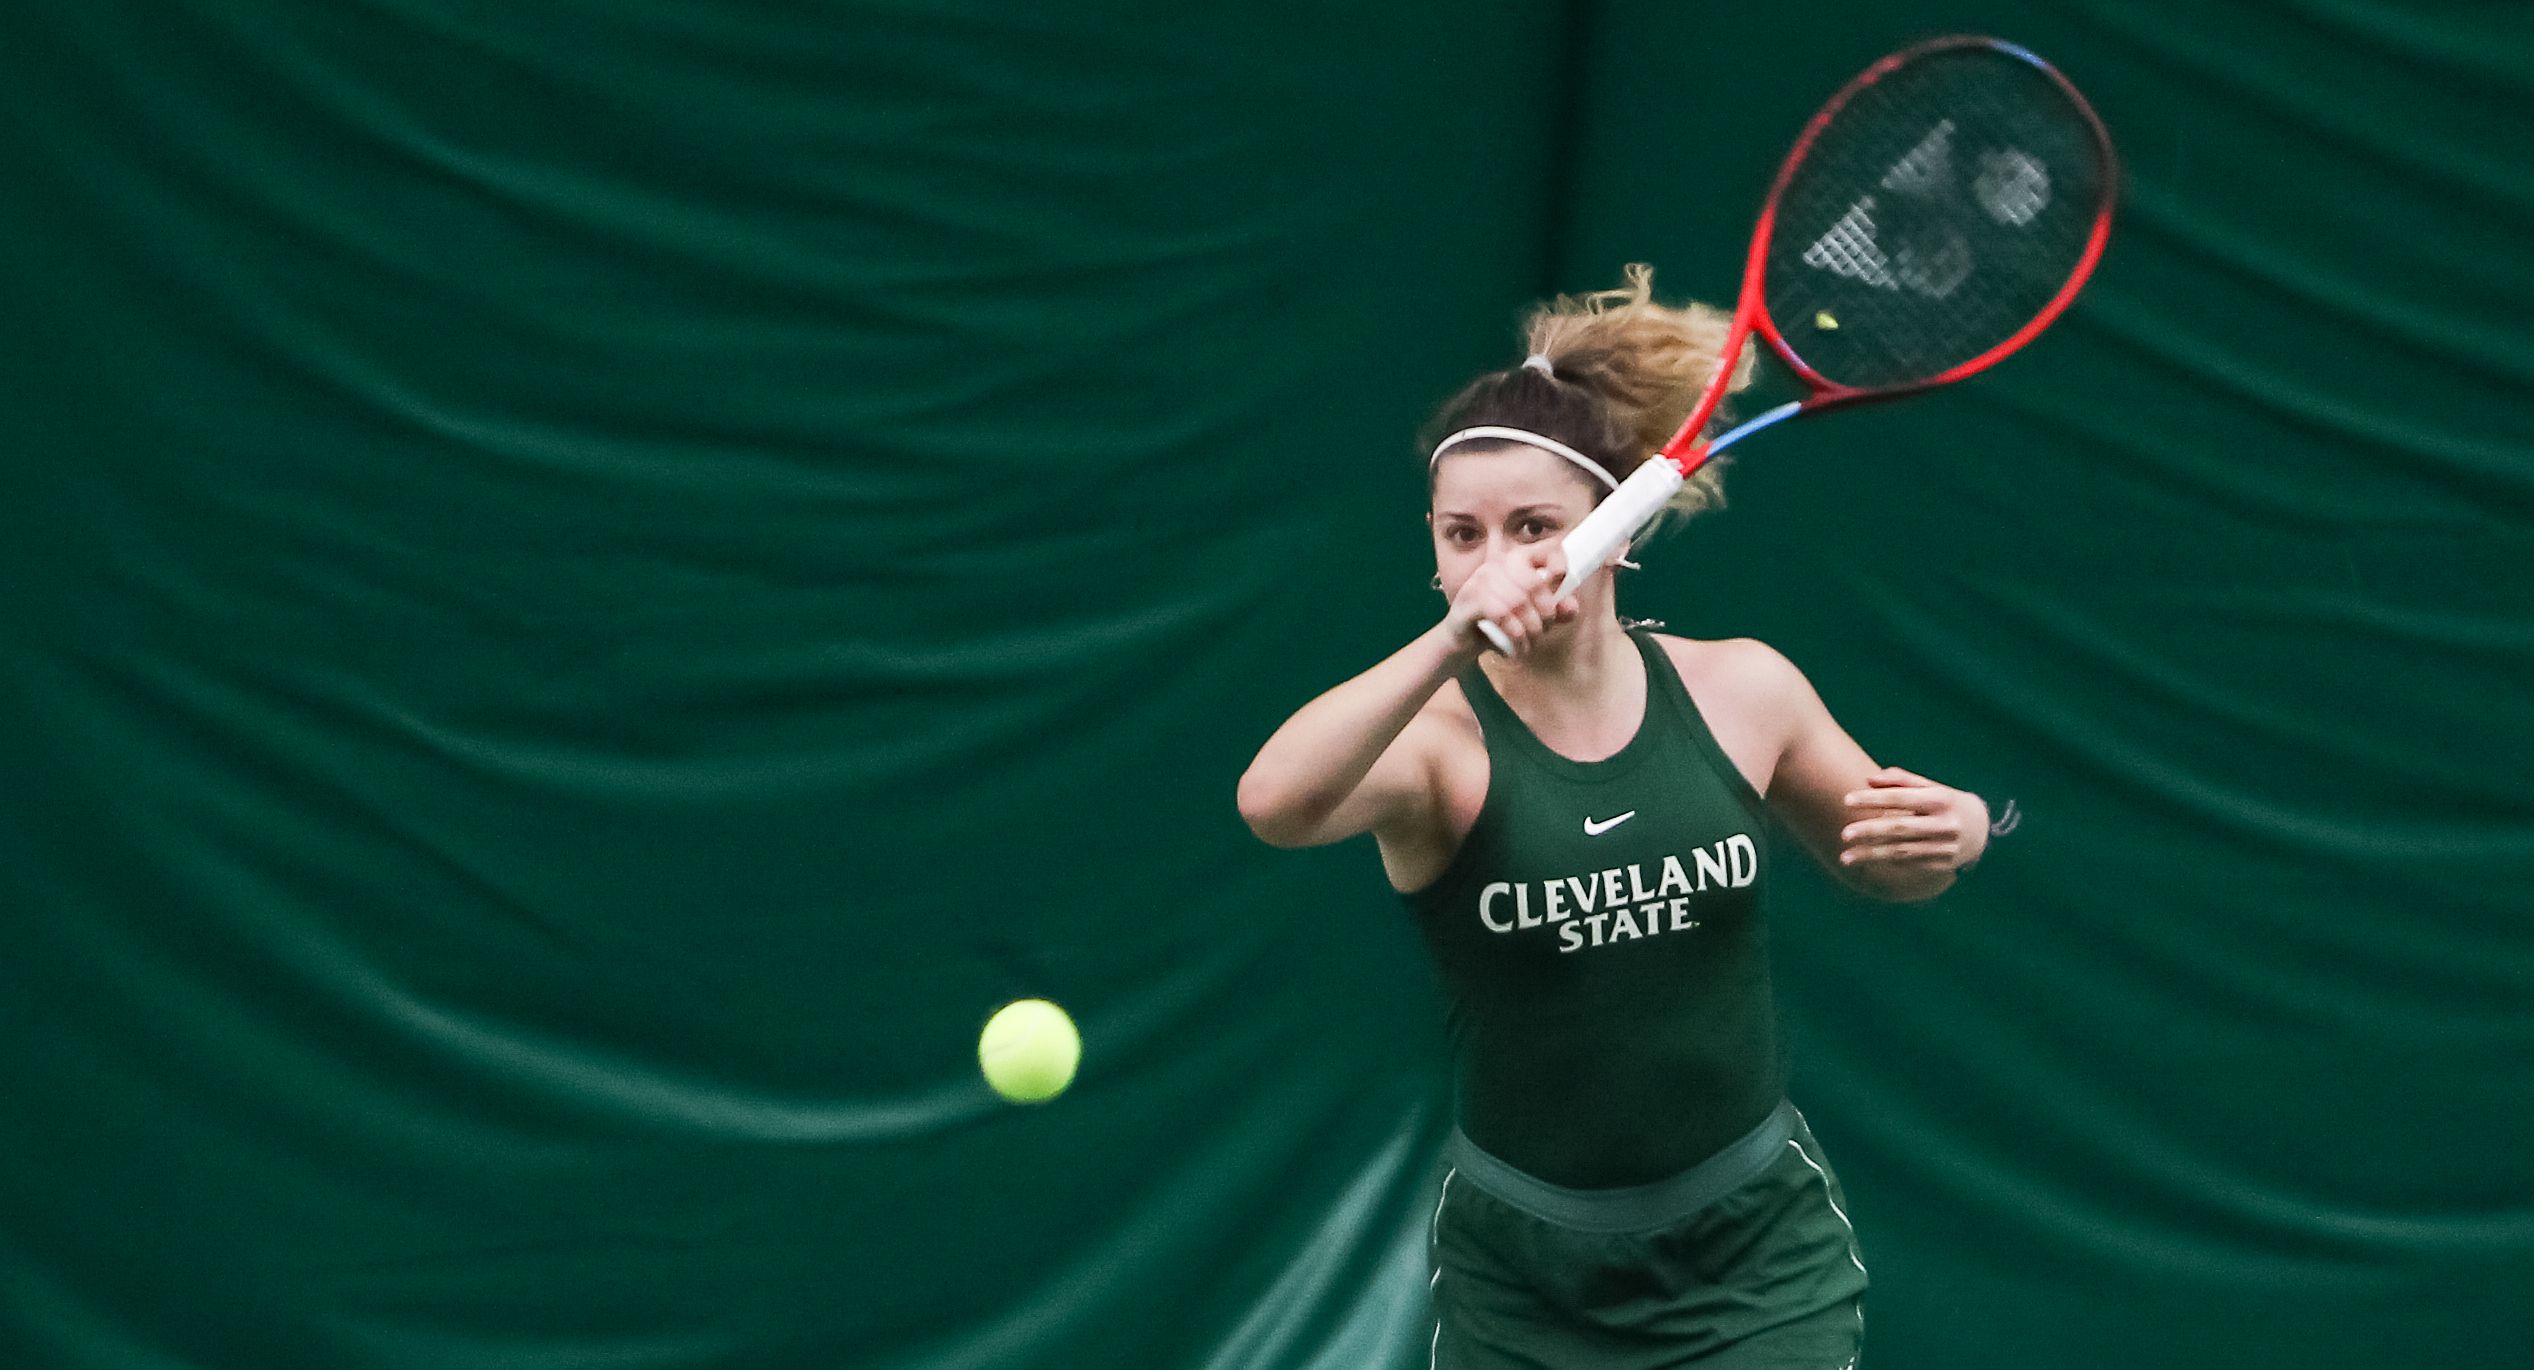 Cleveland State Women’s Tennis Selected Second In #HLTennis Preseason Poll